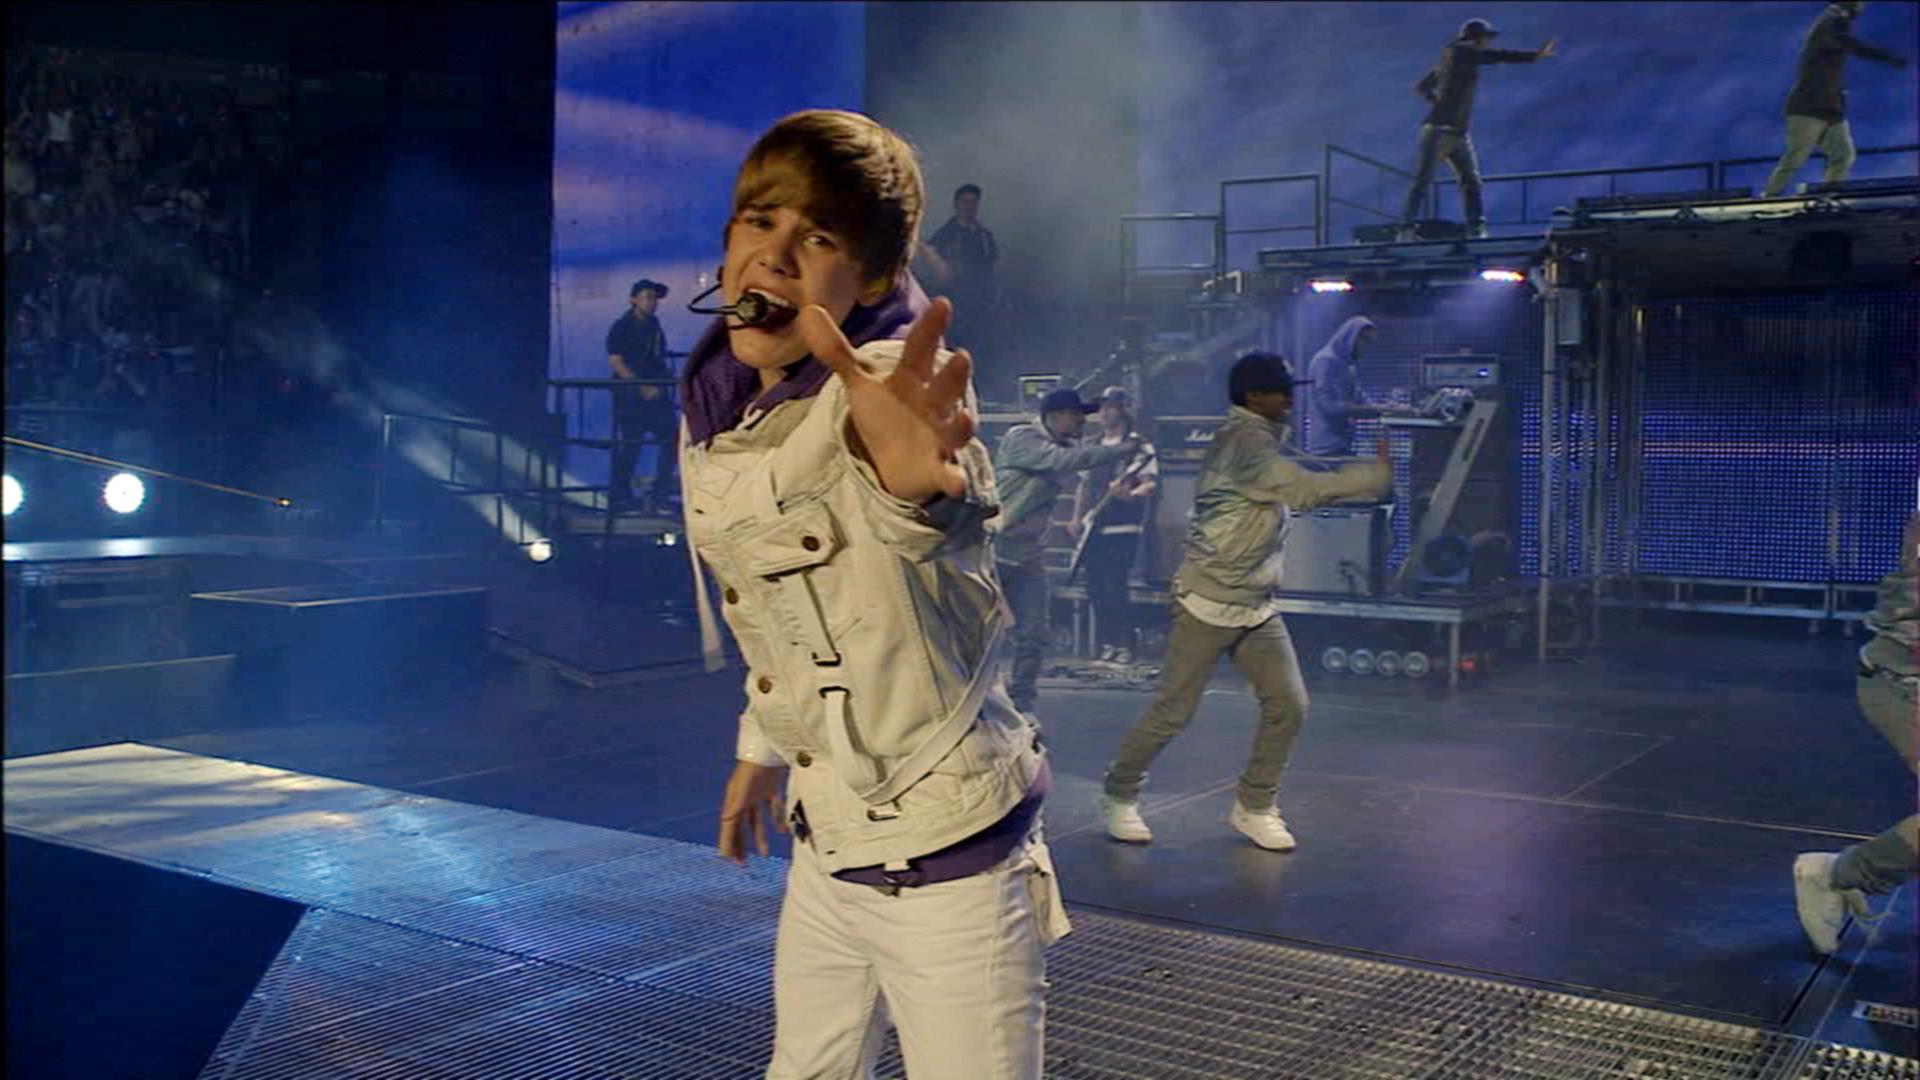 Justin Bieber in the documentary Never Say Never